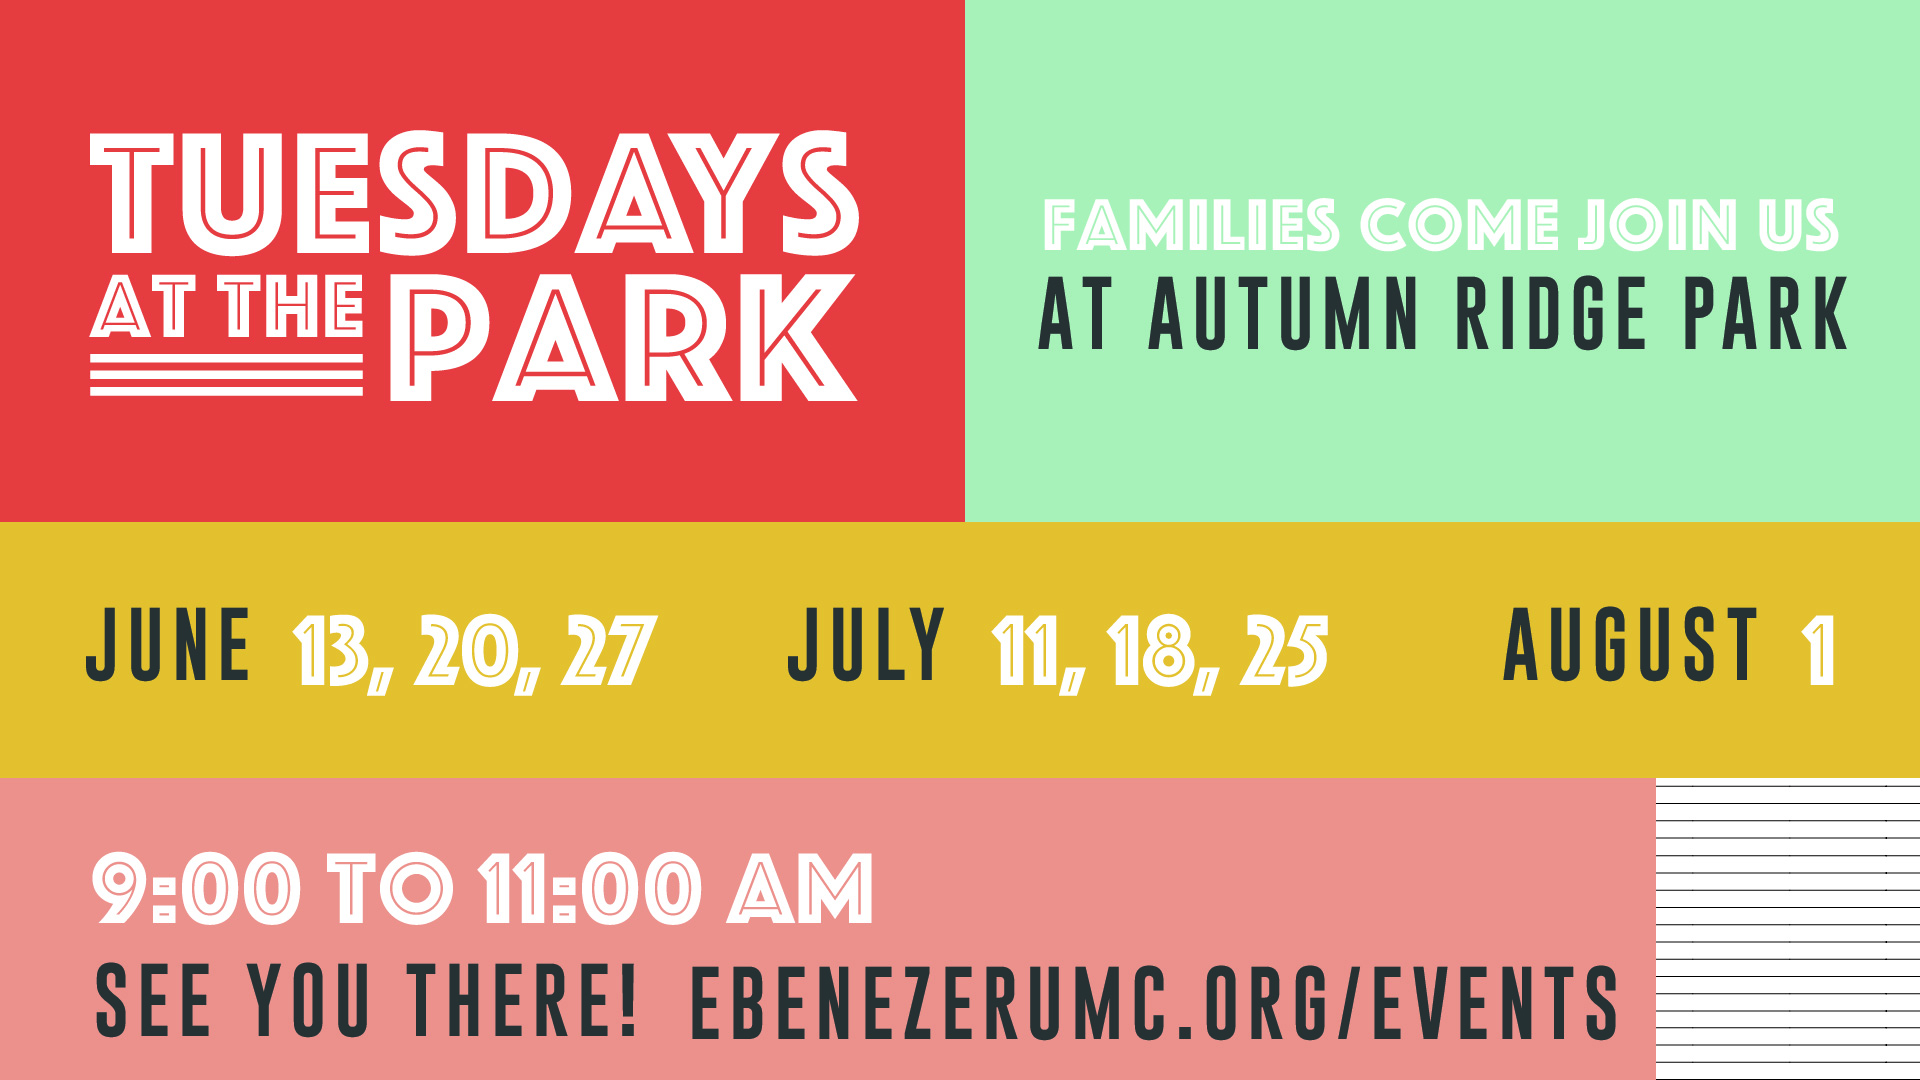 <h1 class="tribe-events-single-event-title">Tuesdays at the Park</h1>